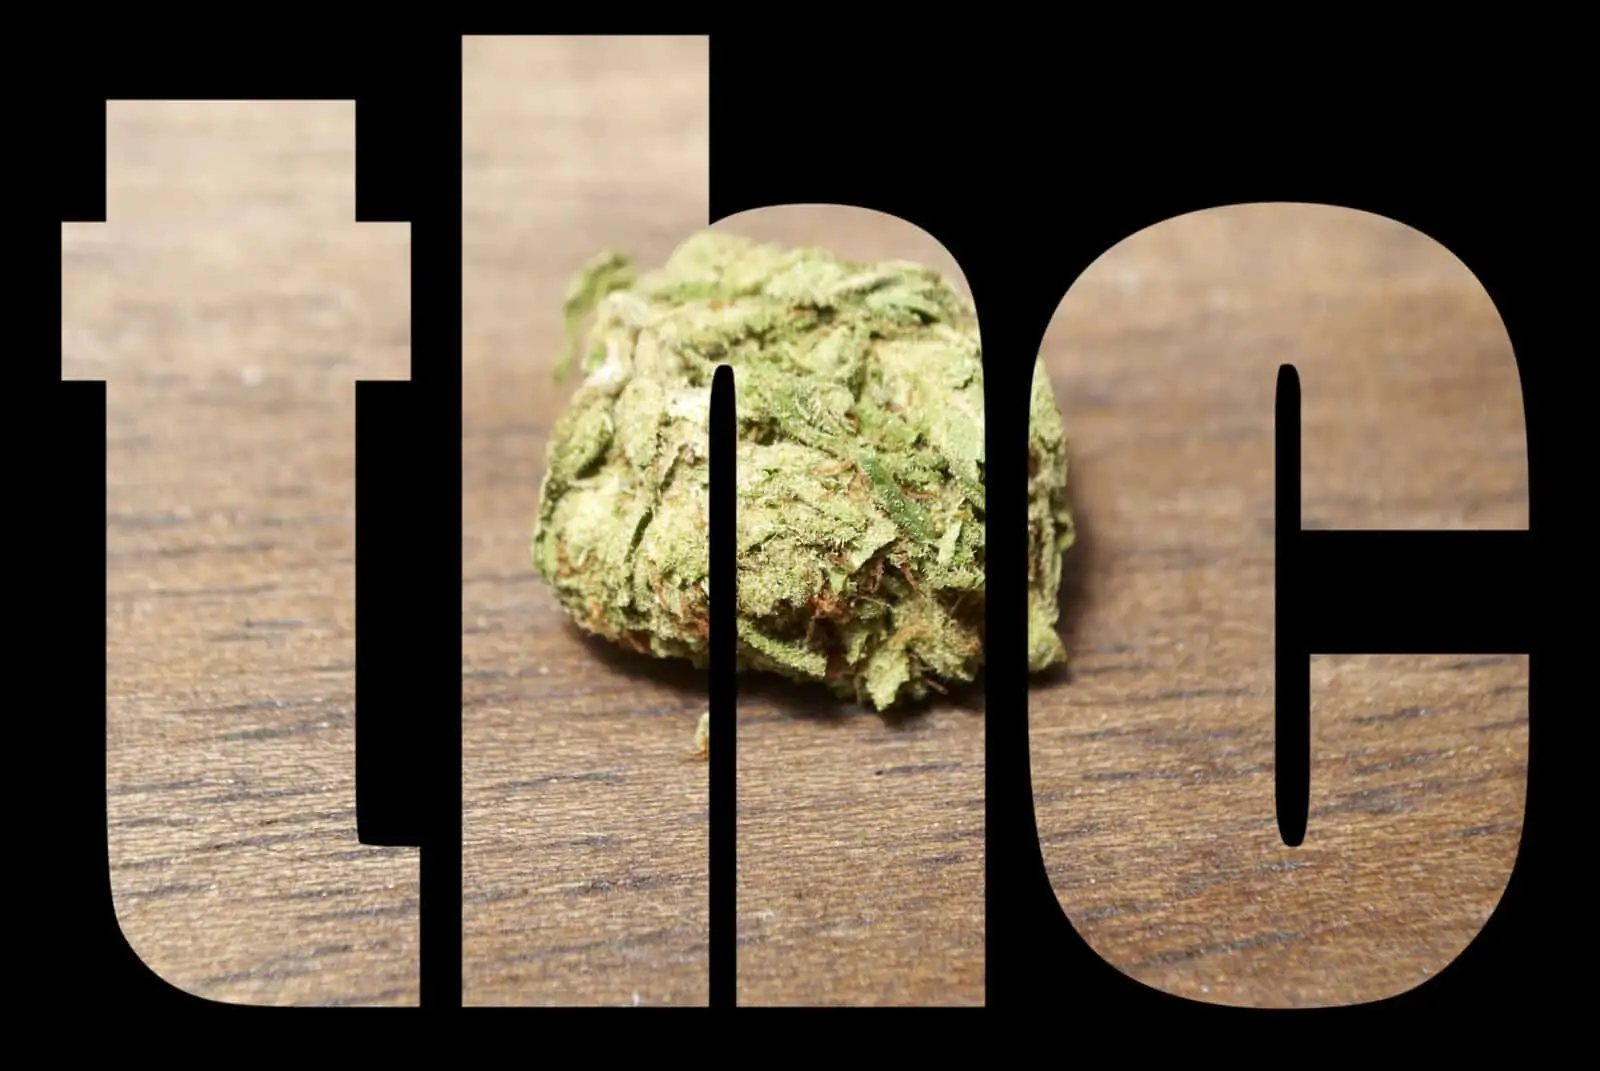 Recent Cannabis Research Shows Importance of THC